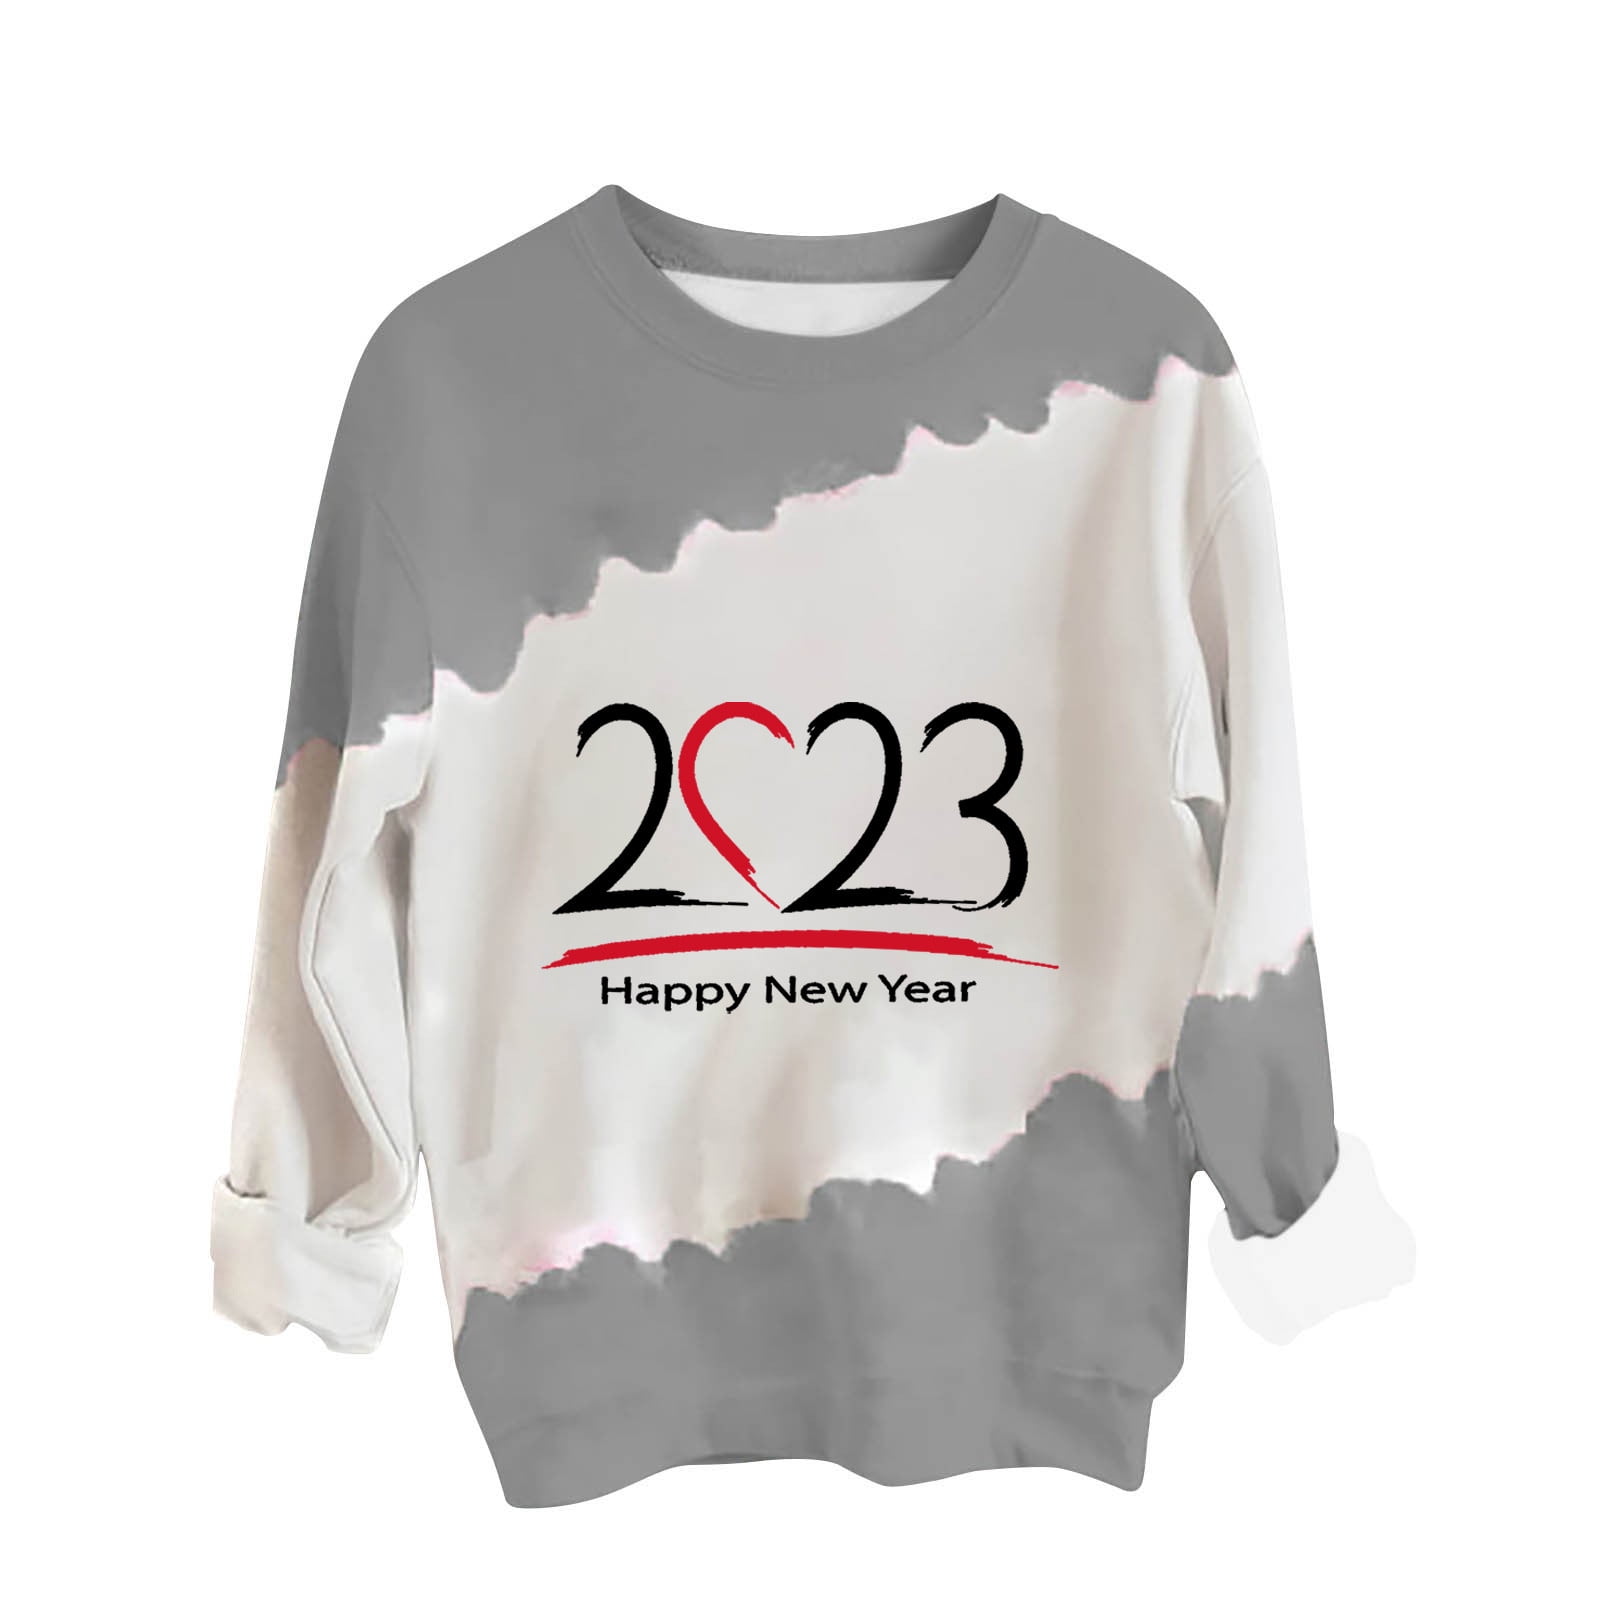 Cymmpu Girls' Happy 223 Tops New Year's Day Holiday Tops Casual Sweatshirts Trendy Blouses Ladies Crewneck Clothing Long Sleeve Shirts Women's Novelty